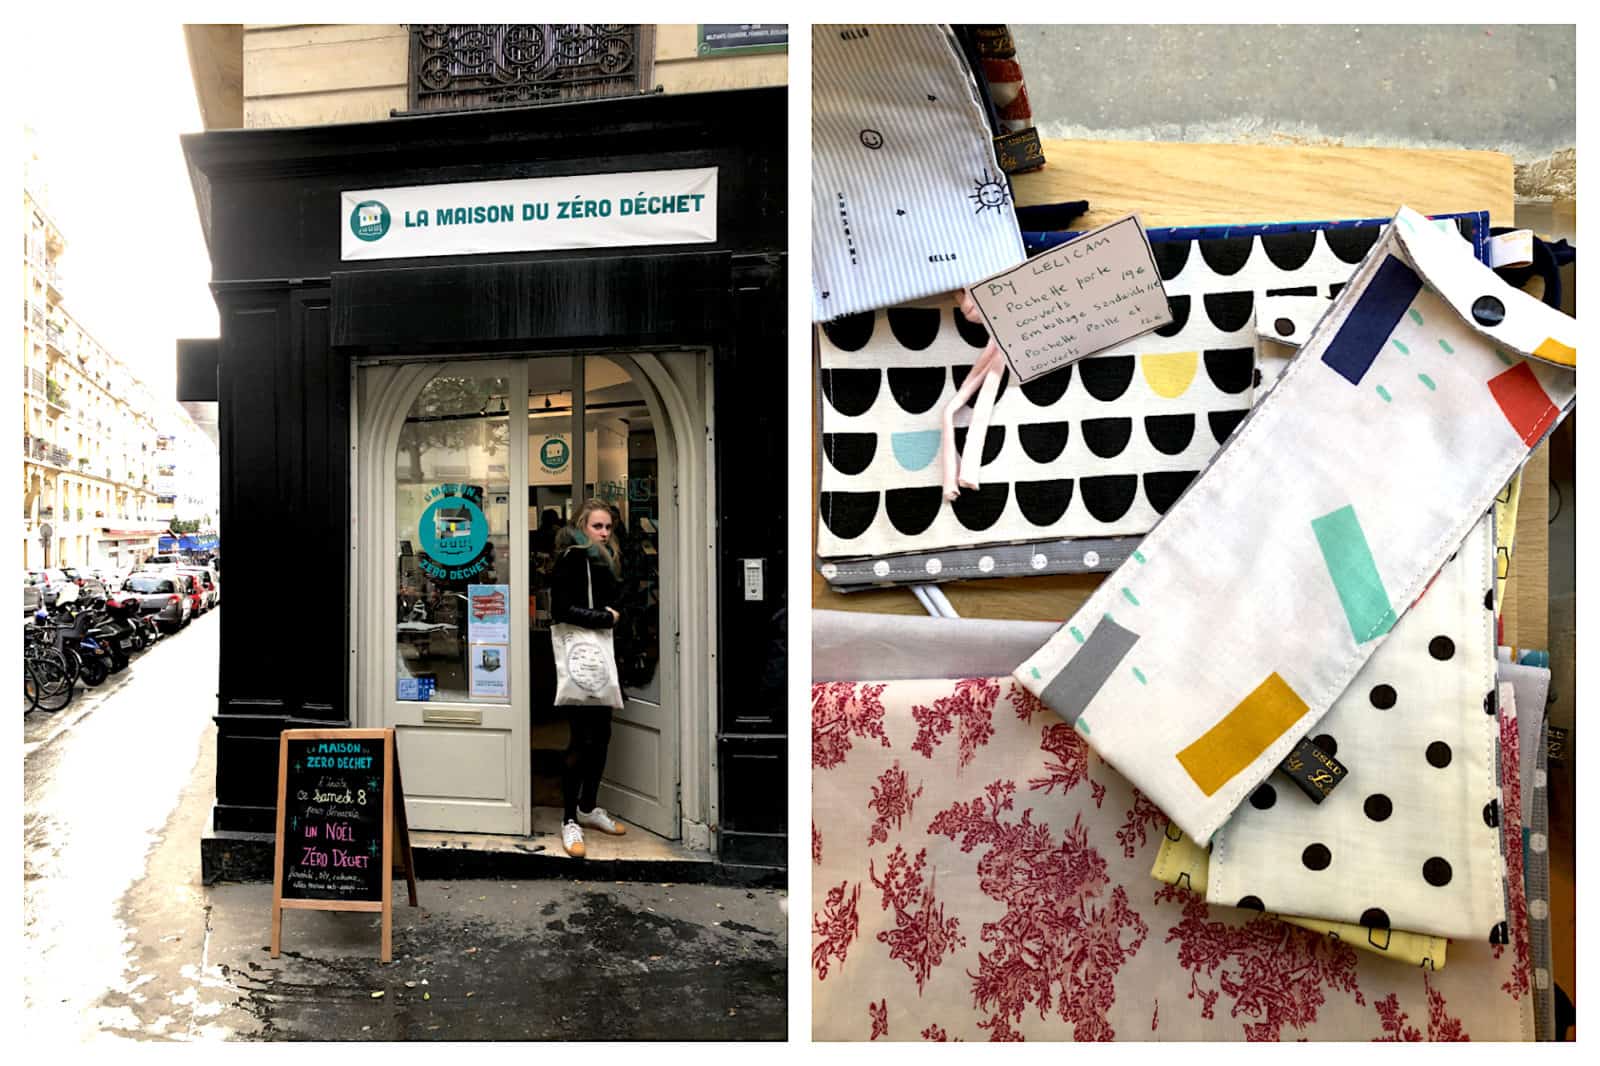 Wandering what gifts to buy in Paris? Head to the Maison du Zéro Déchet (house of zero waste) Paris concept store (left) for handmade zero-waste lifestyle items like these colorful silverware holders (right). 